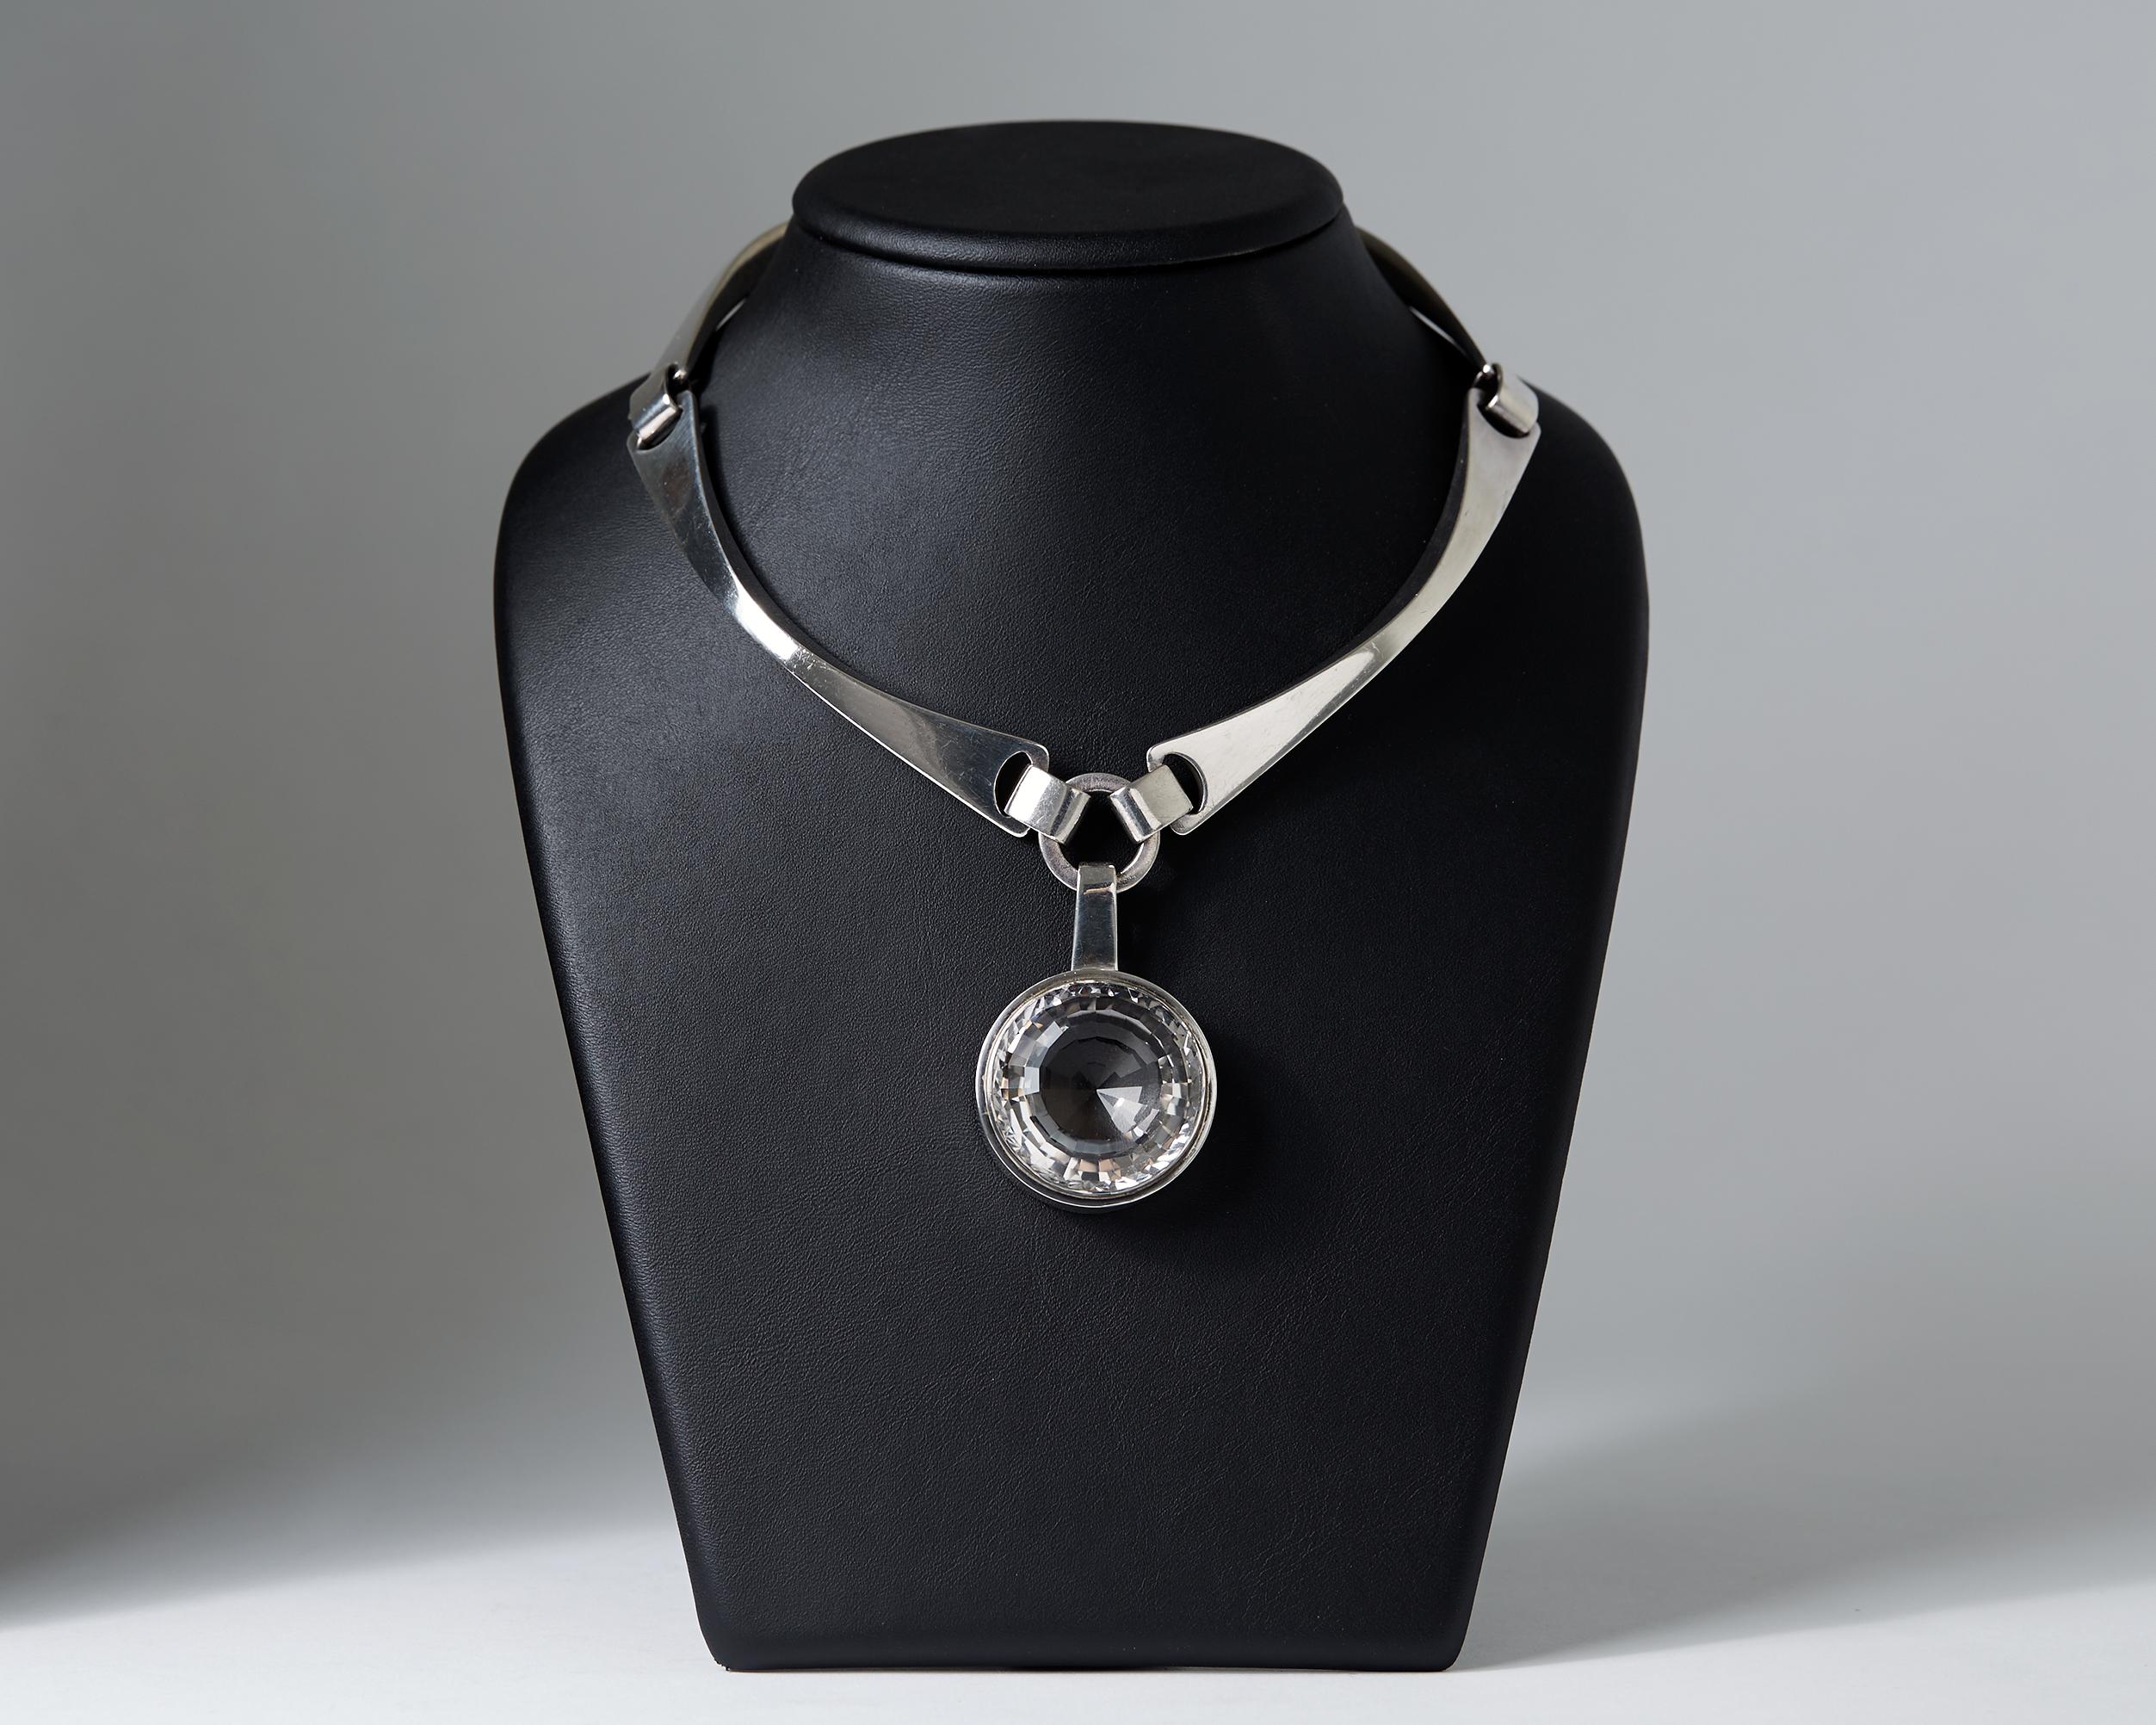 Heavy sterling silver and rock crystal.

L: 40 cm/ 15 3/4''
Lenght of the pendant: 5 cm/ 2''